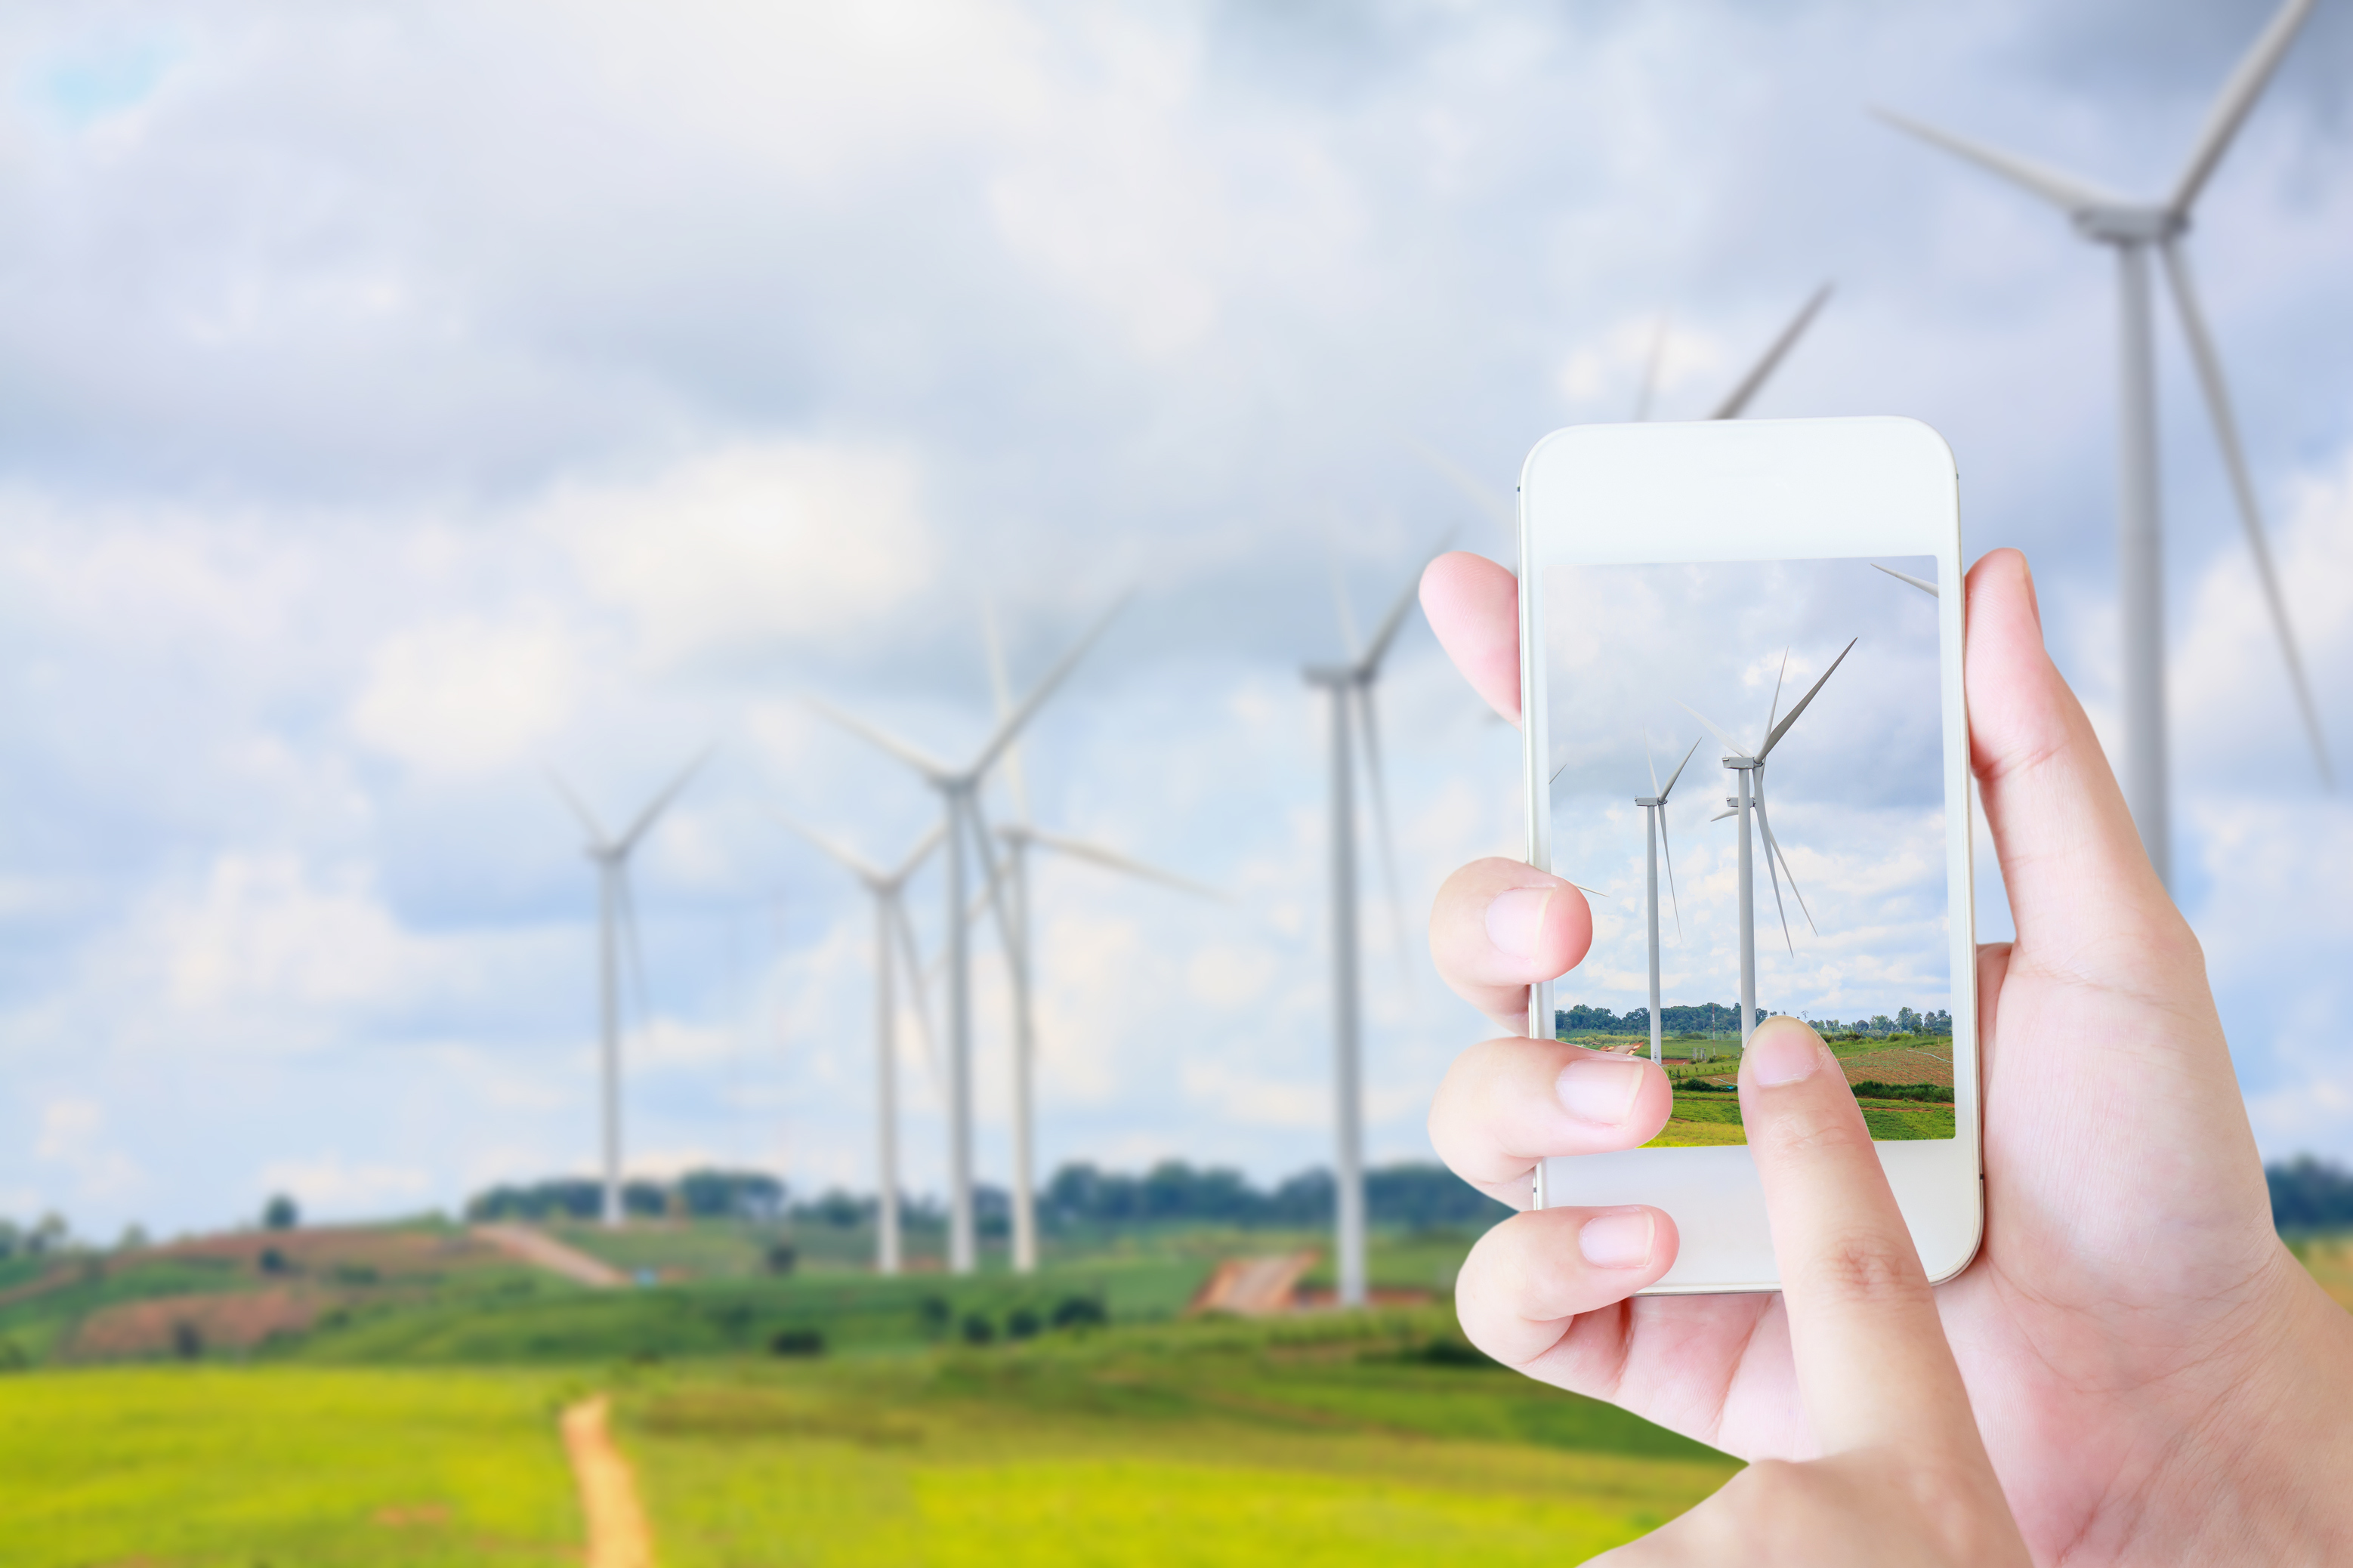 Hands holding a cellphone taking a photo of wind turbines.